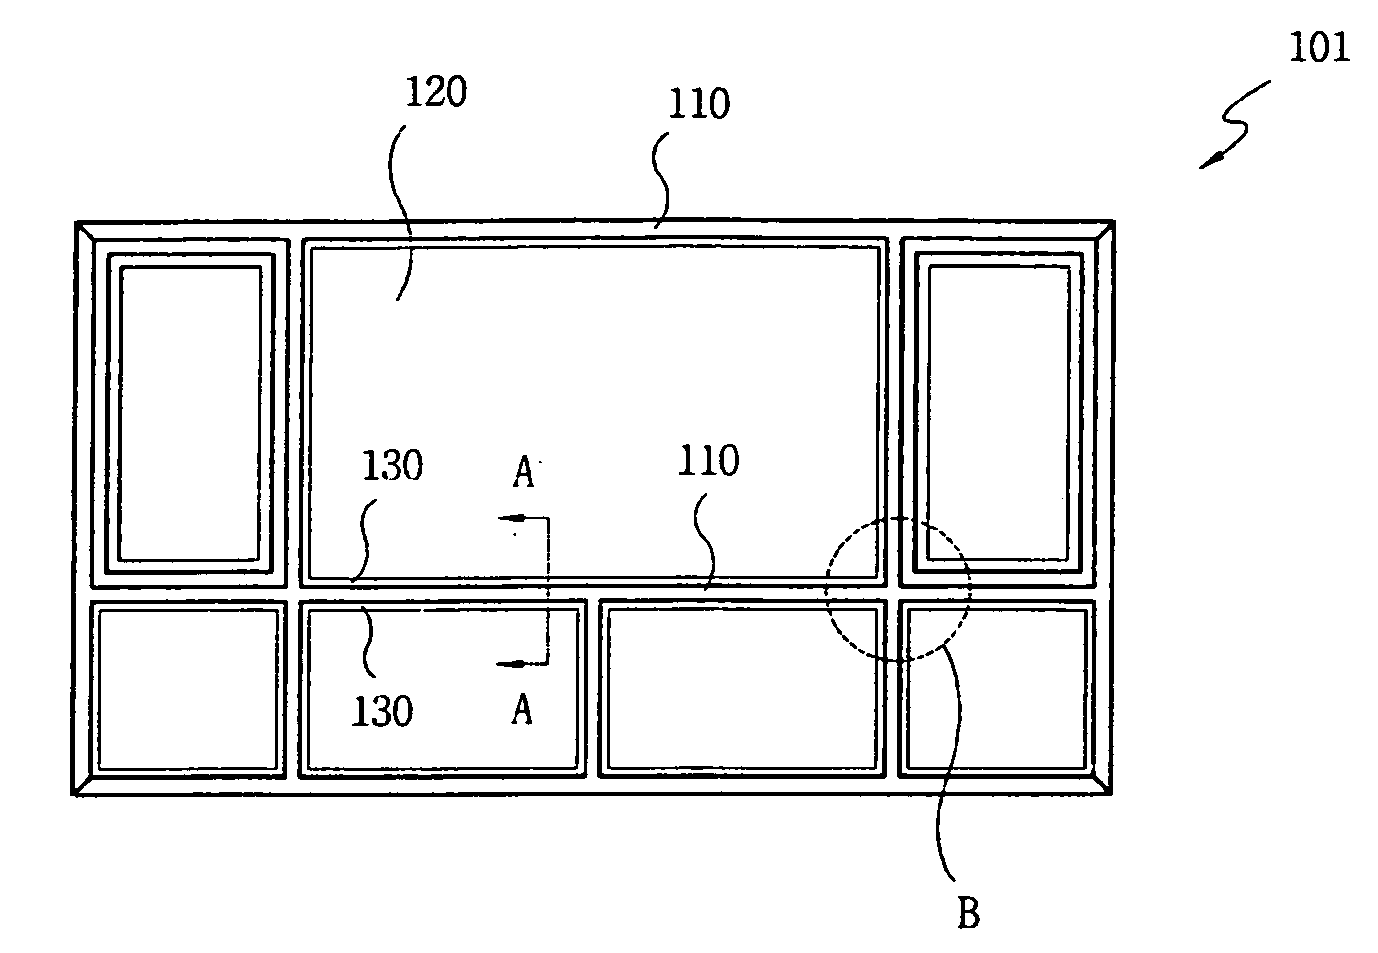 Window having means for treating water generated by dew condensation